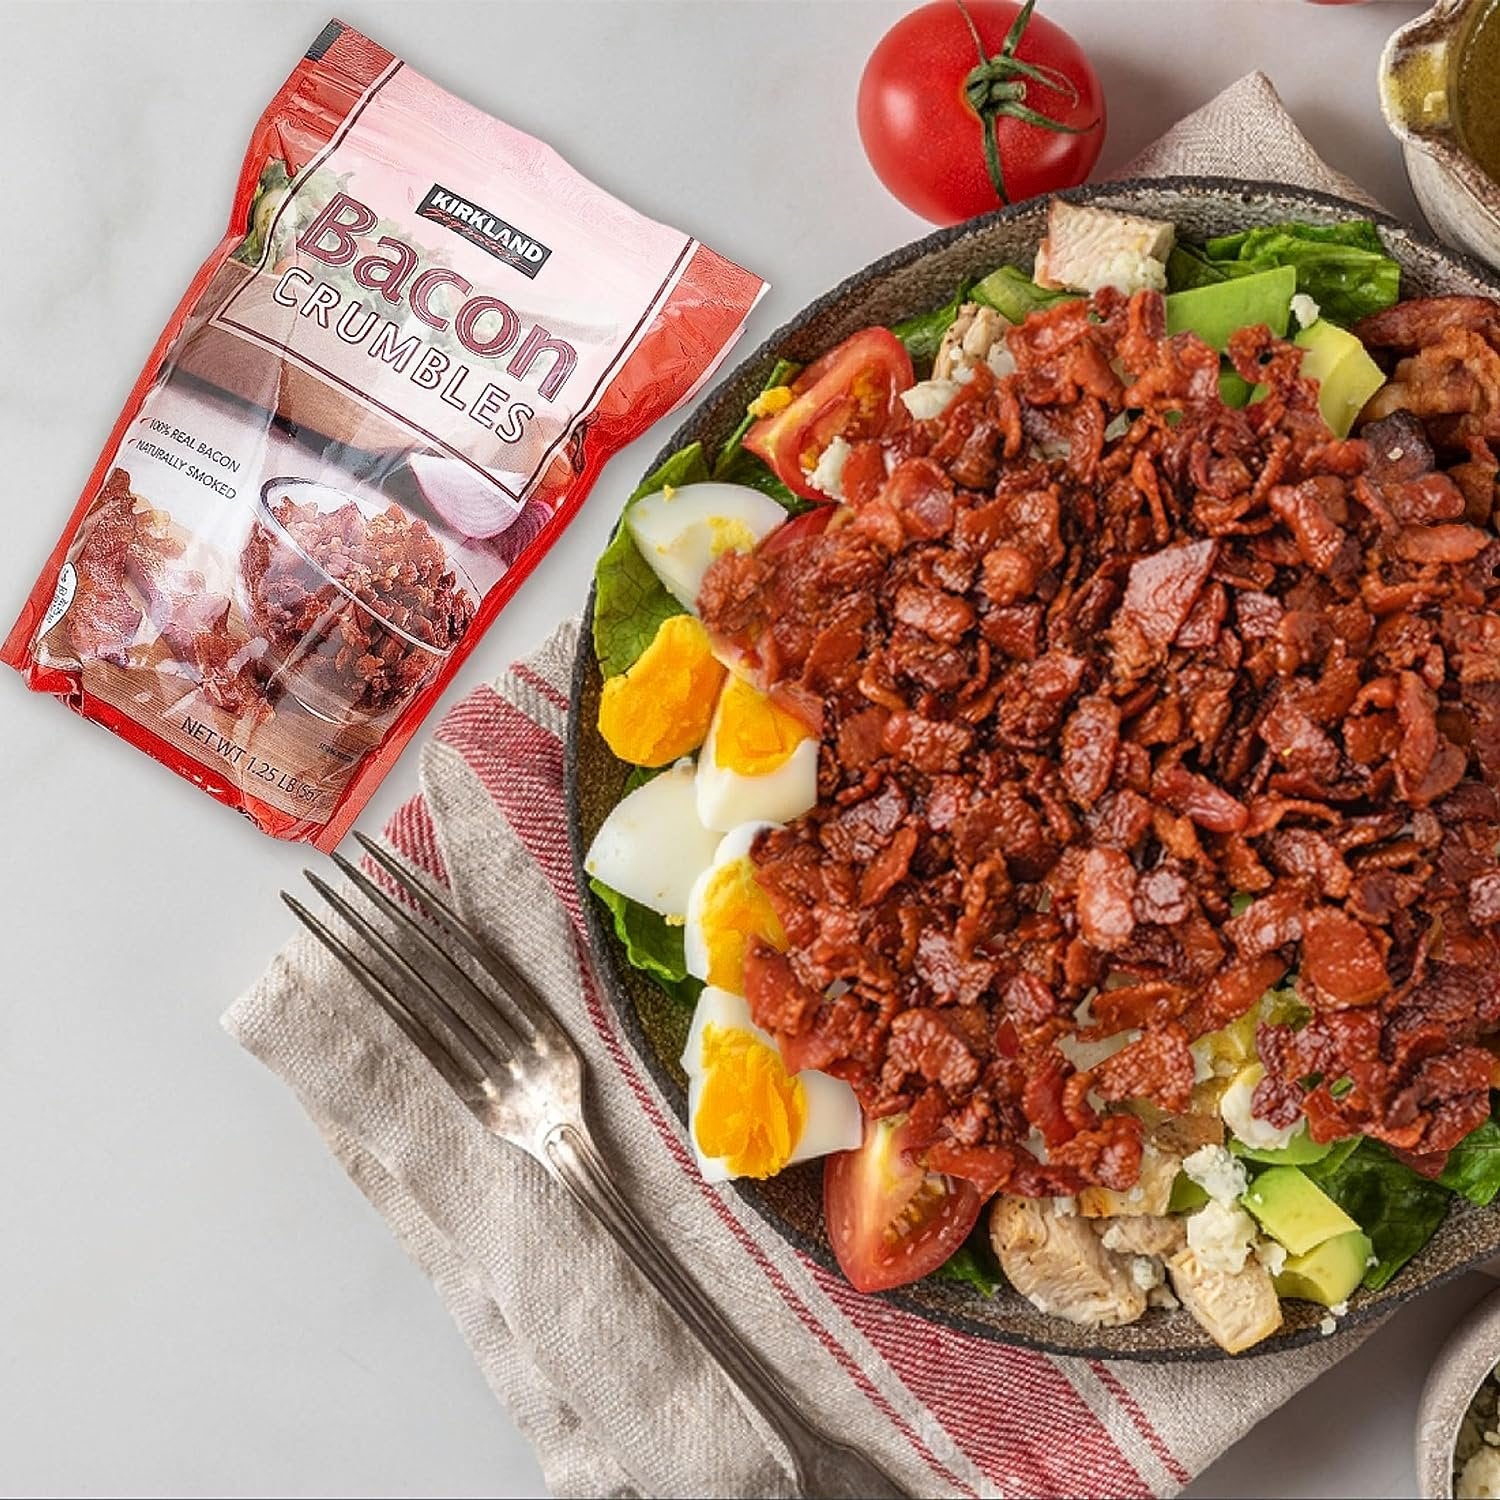 Kirkland Signature Crumbled Bacon Bits - Irresistibly Flavorful Cooked Bacon - Bacon Cooked Ready To Eat, Premium Quality 20oz with Bacon Bits Real for Culinary Creations - 1 Pack Bacon Bits For Salad